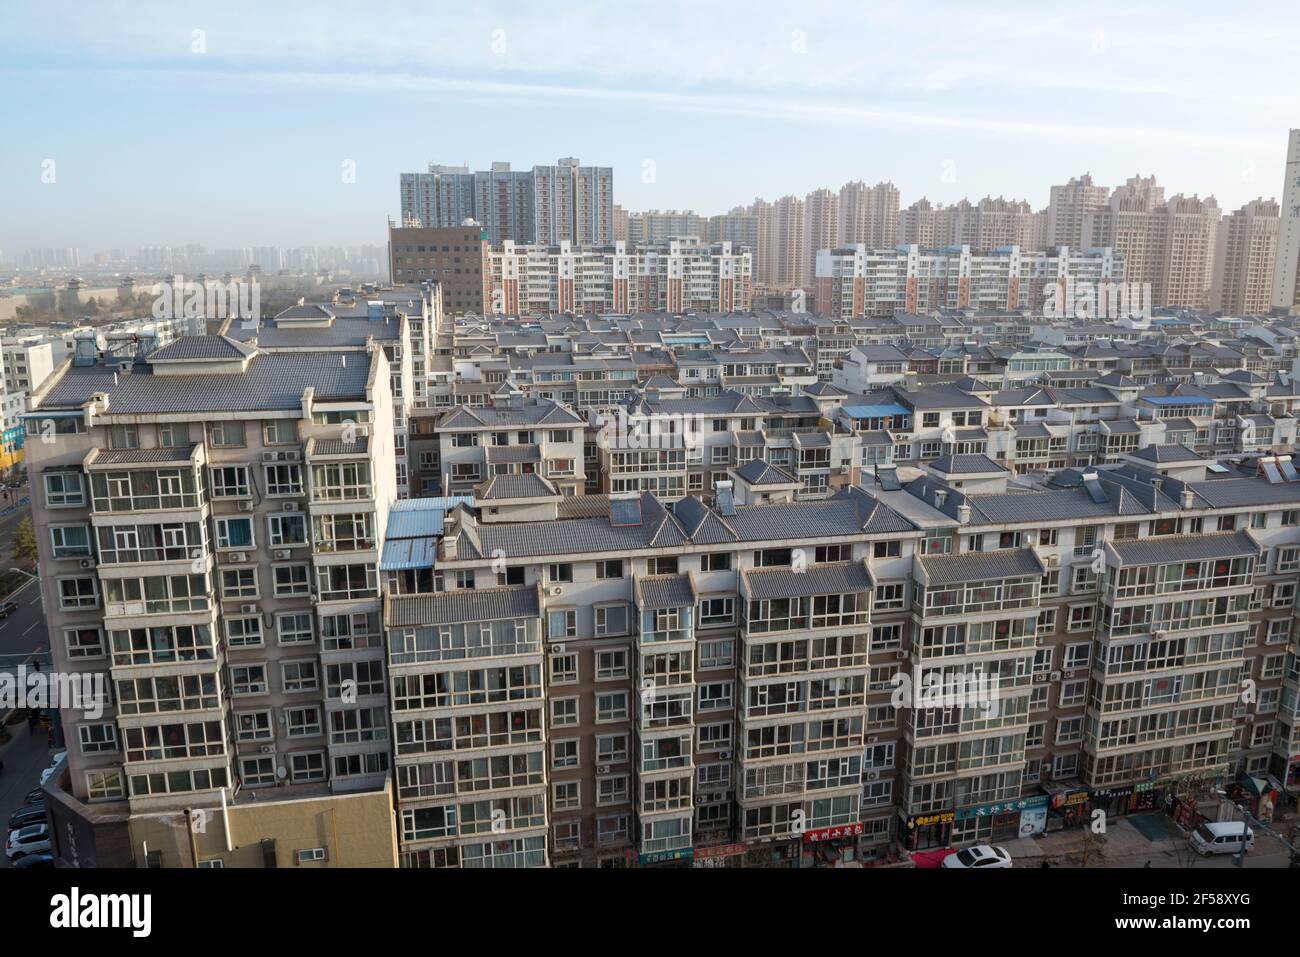 Housing construction in the center of Datong, Shanxi, China. The picture shows the ancient city wall of the Ming Dynasty. Stock Photo